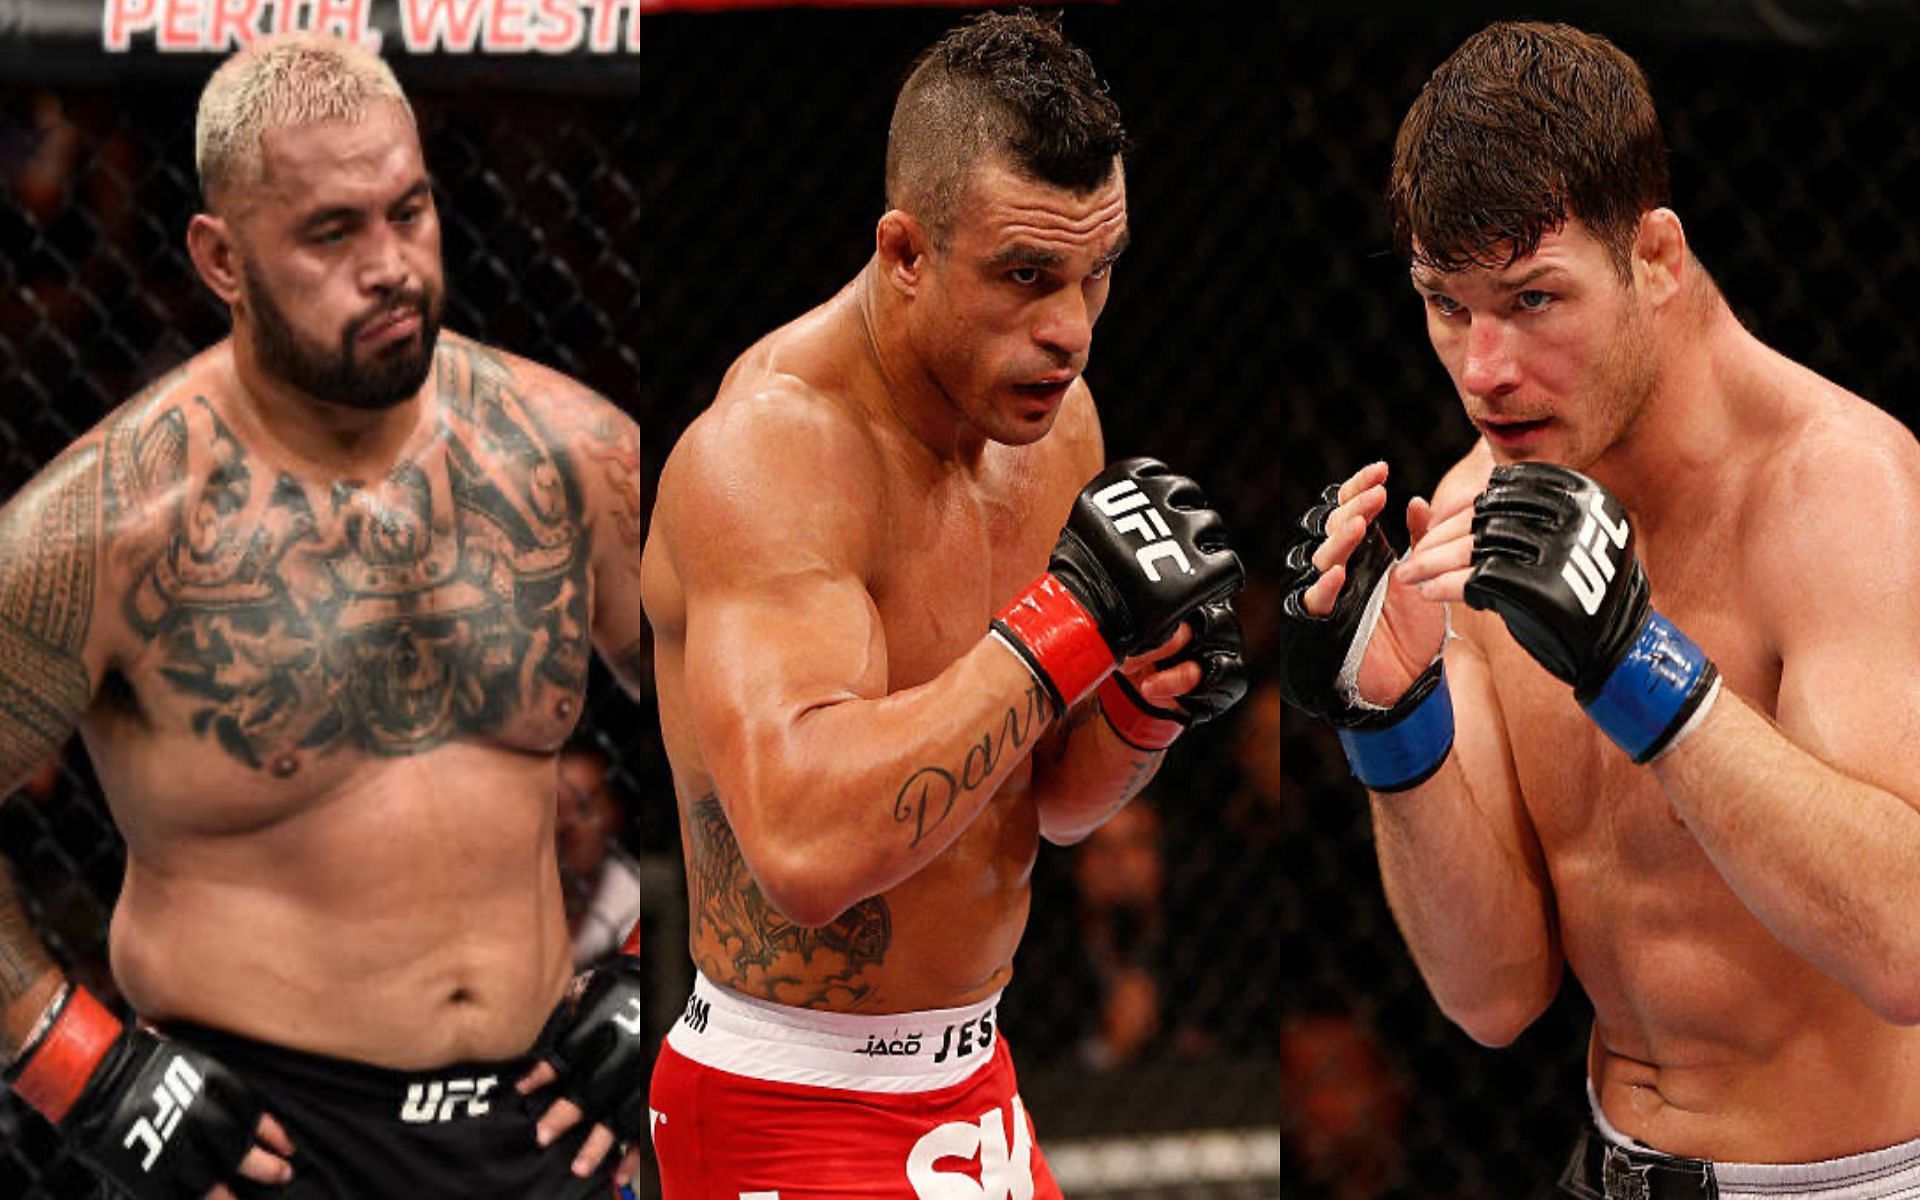 From left to right: Mark Hunt, Vitor Belfort, and Michael Bisping [Images Courtesy: Josh Hedges and Jeff Bottari]